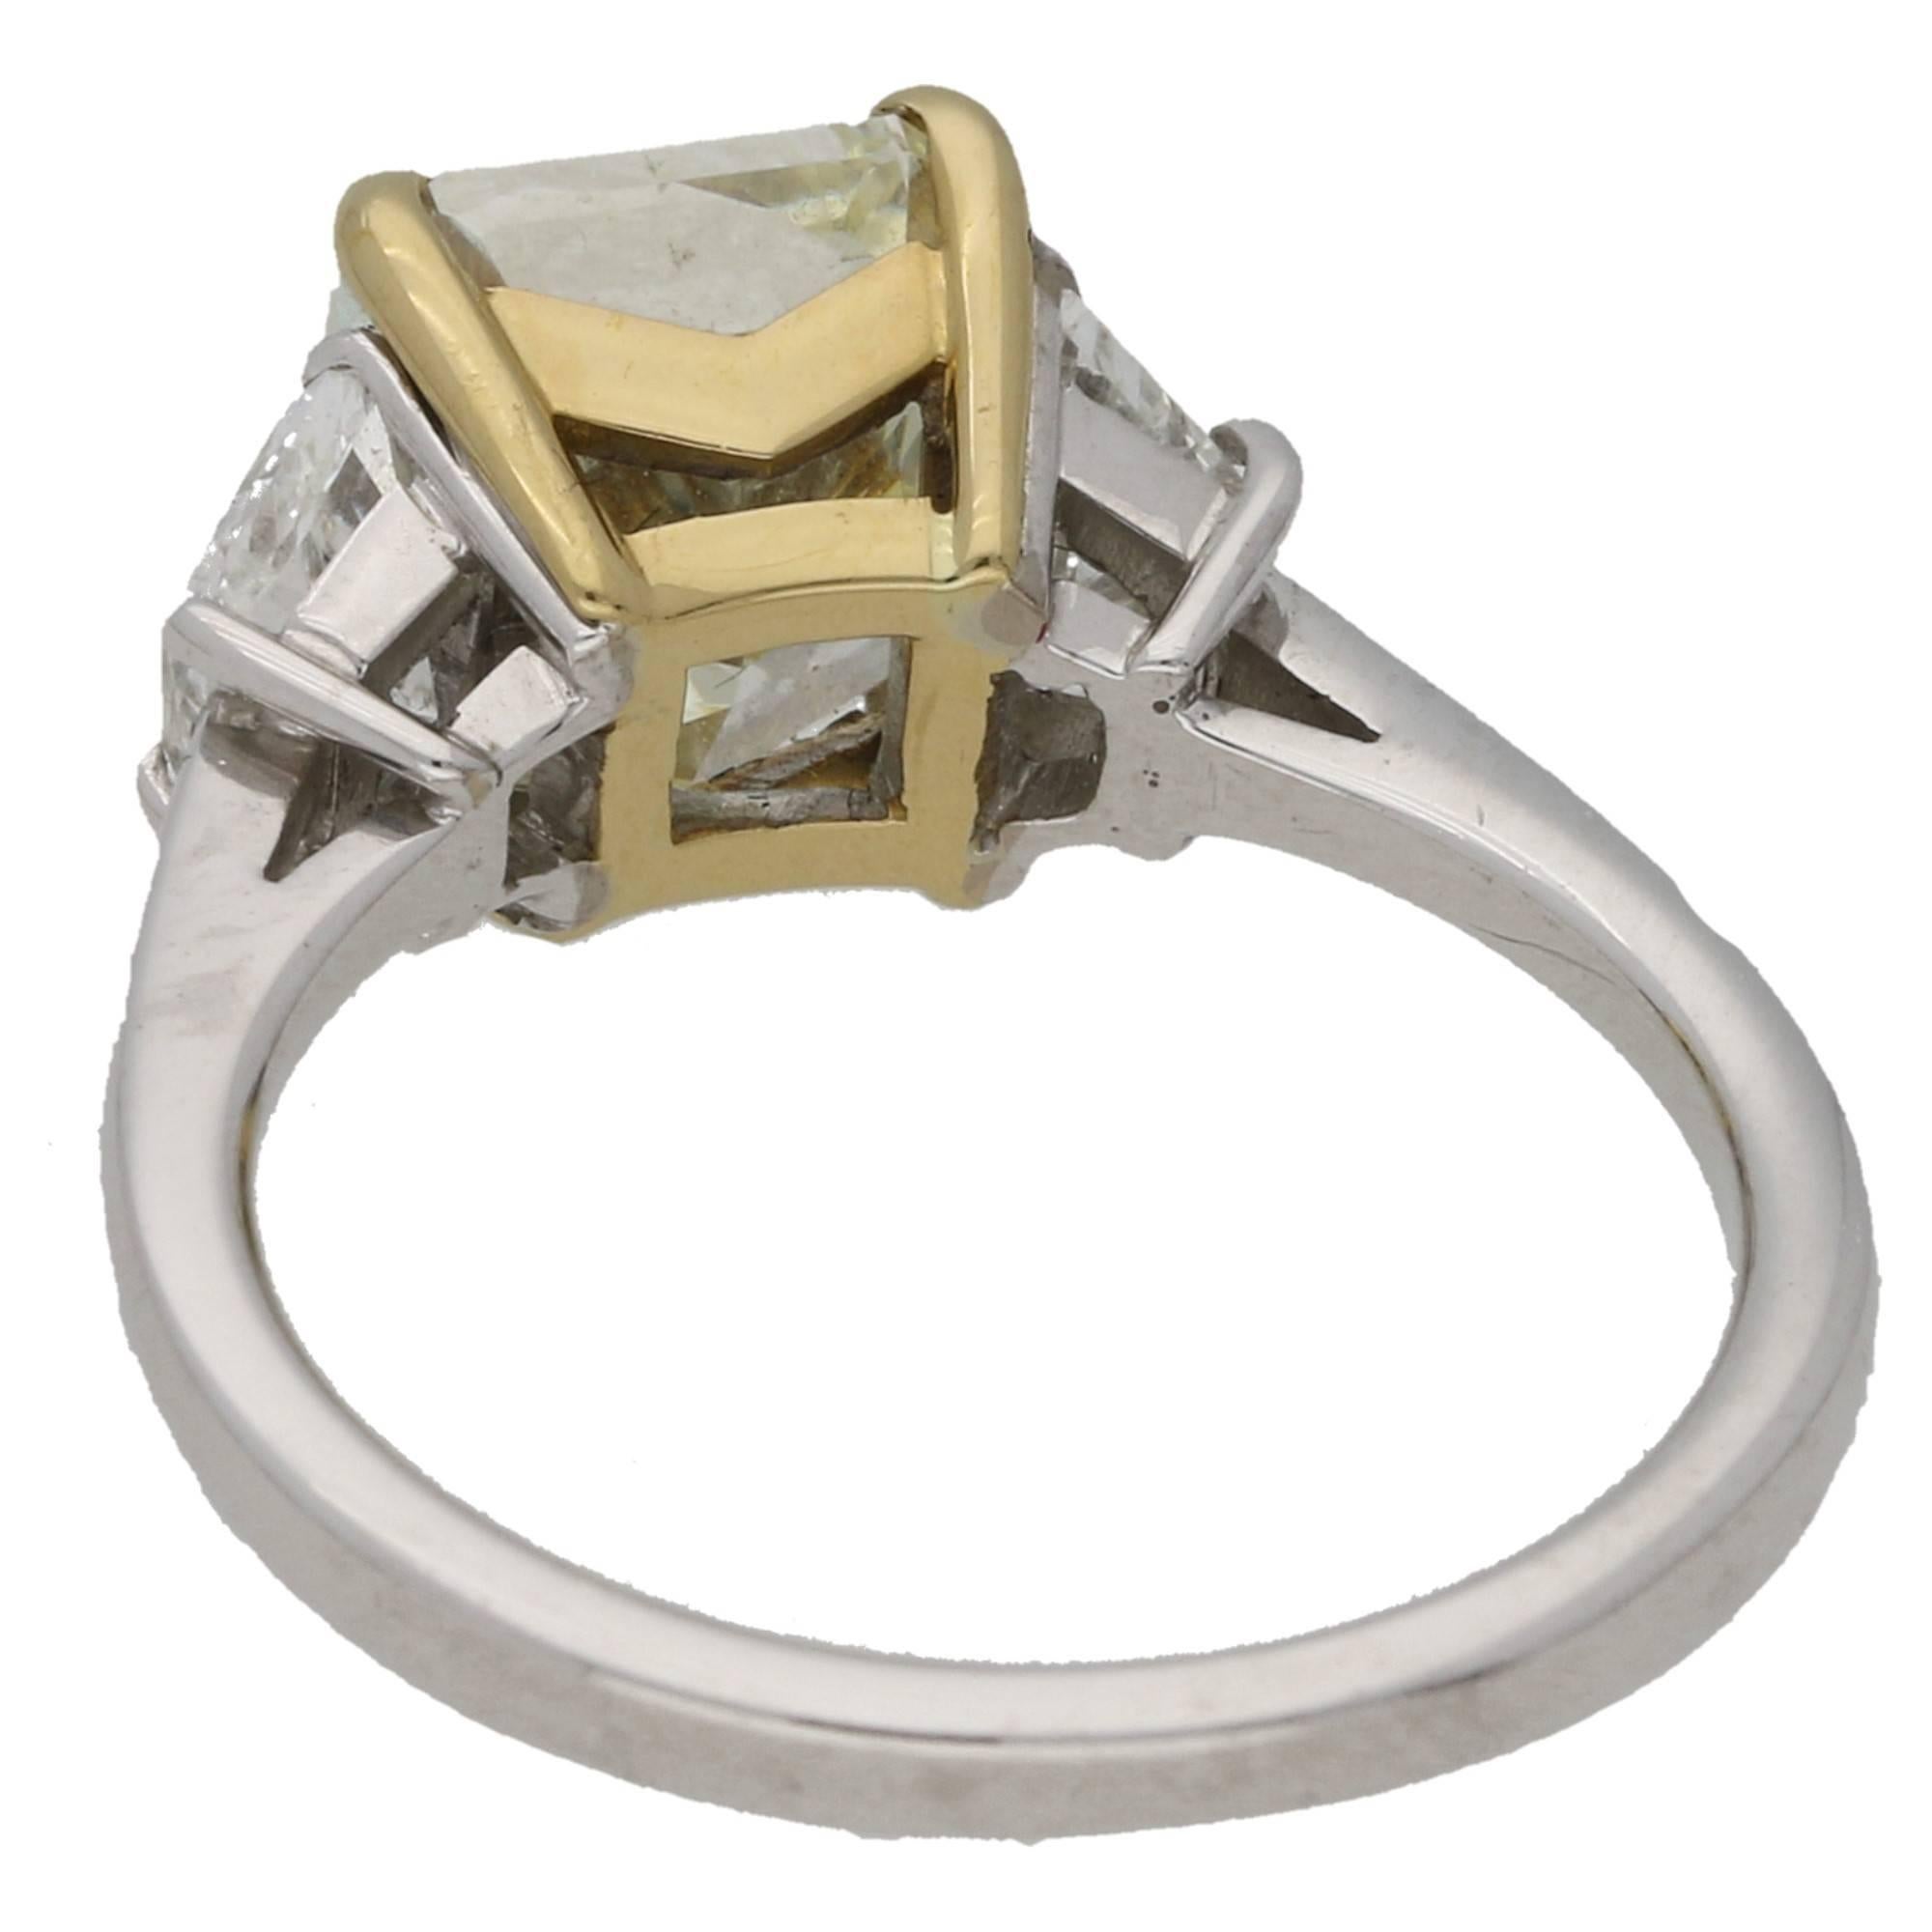 A simply stunning three stone yellow diamond engagement ring set in 18k yellow and white gold. The piece is centrally set with a natural fancy yellow radiant cut diamond which is independently certified as 3.51 carats, VS clarity. This is set in a